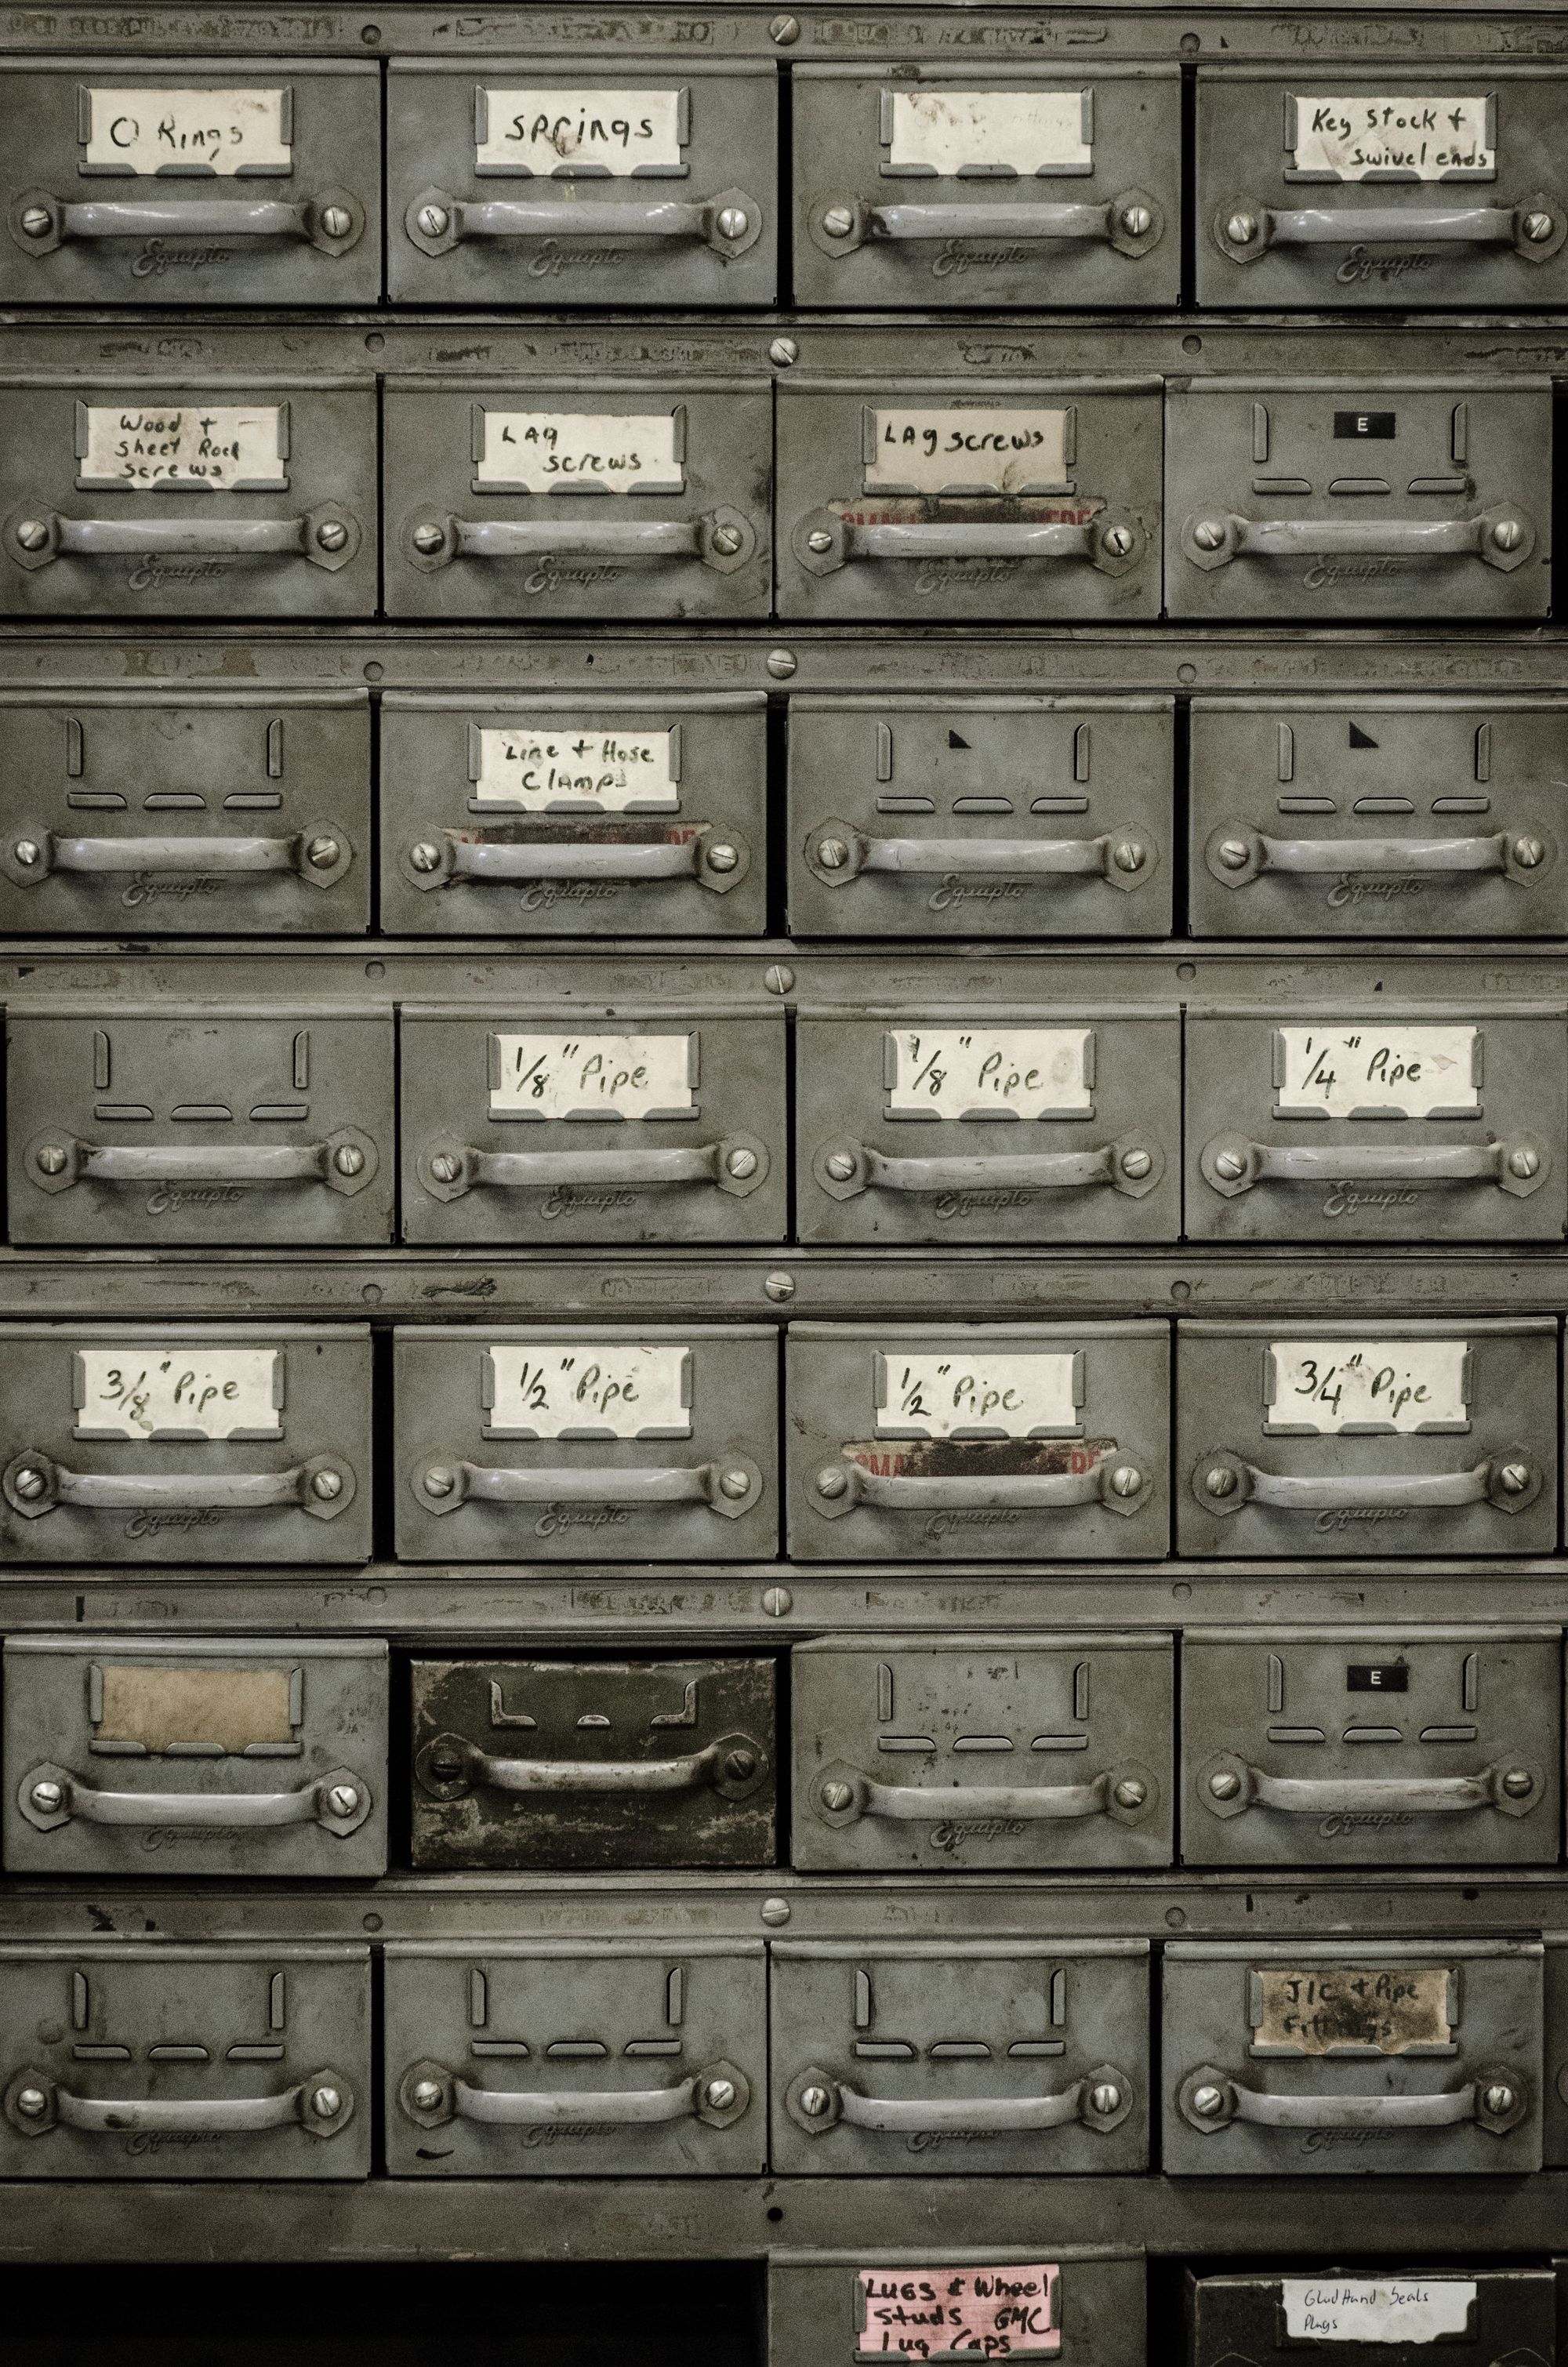 Rows and Columns of metal document cabinets with handwritten labels.